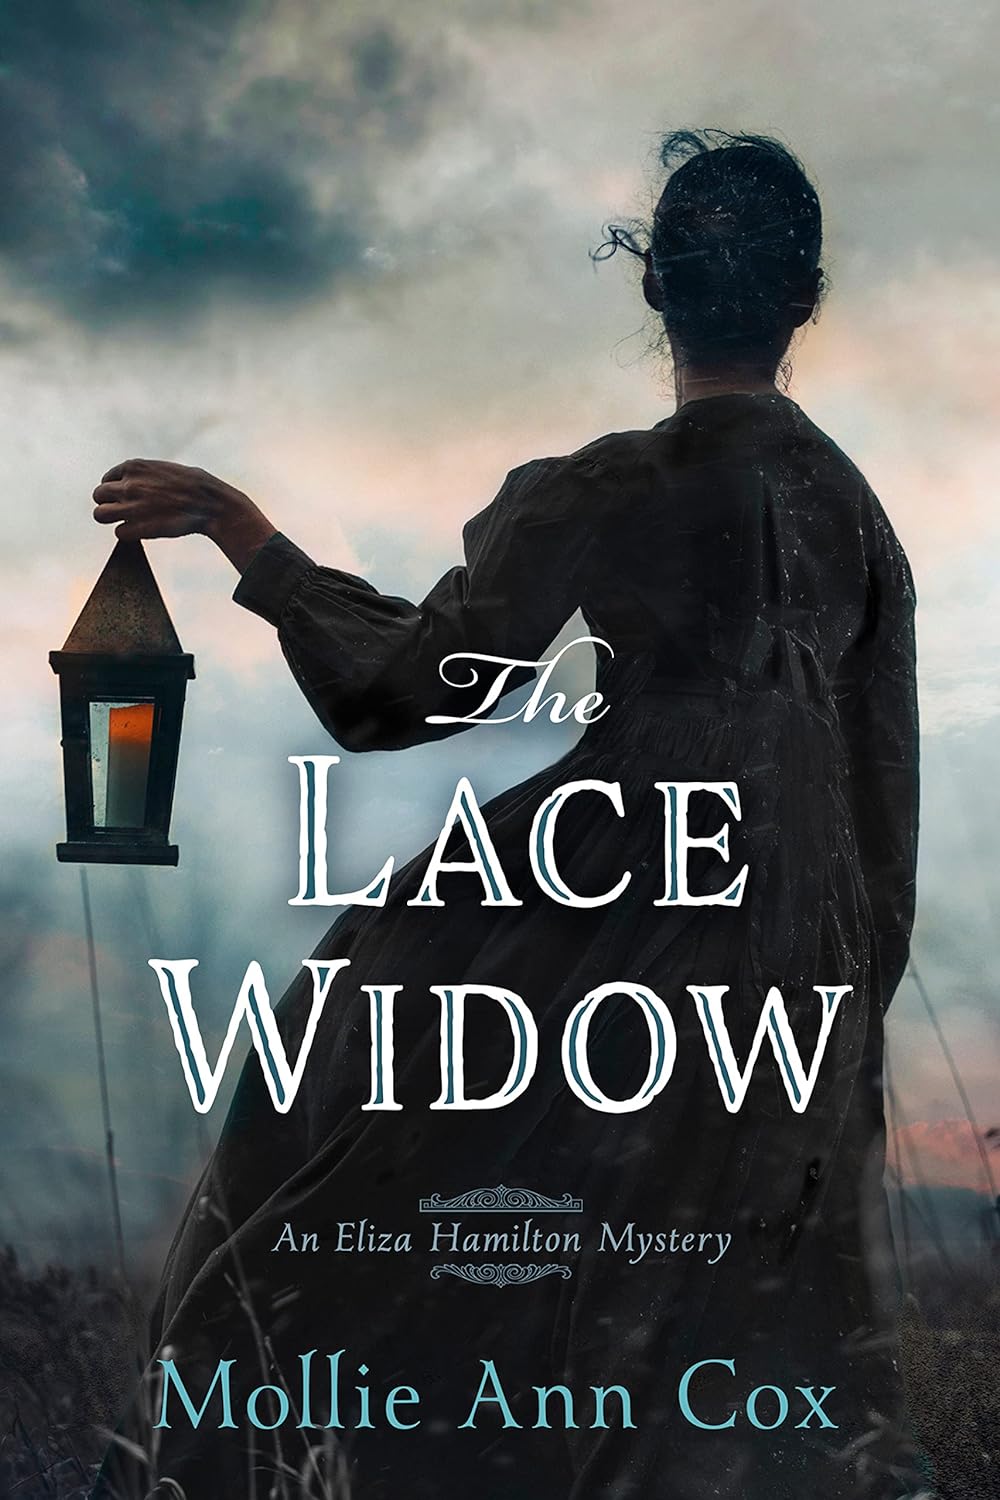 Image for "The Lace Widow"